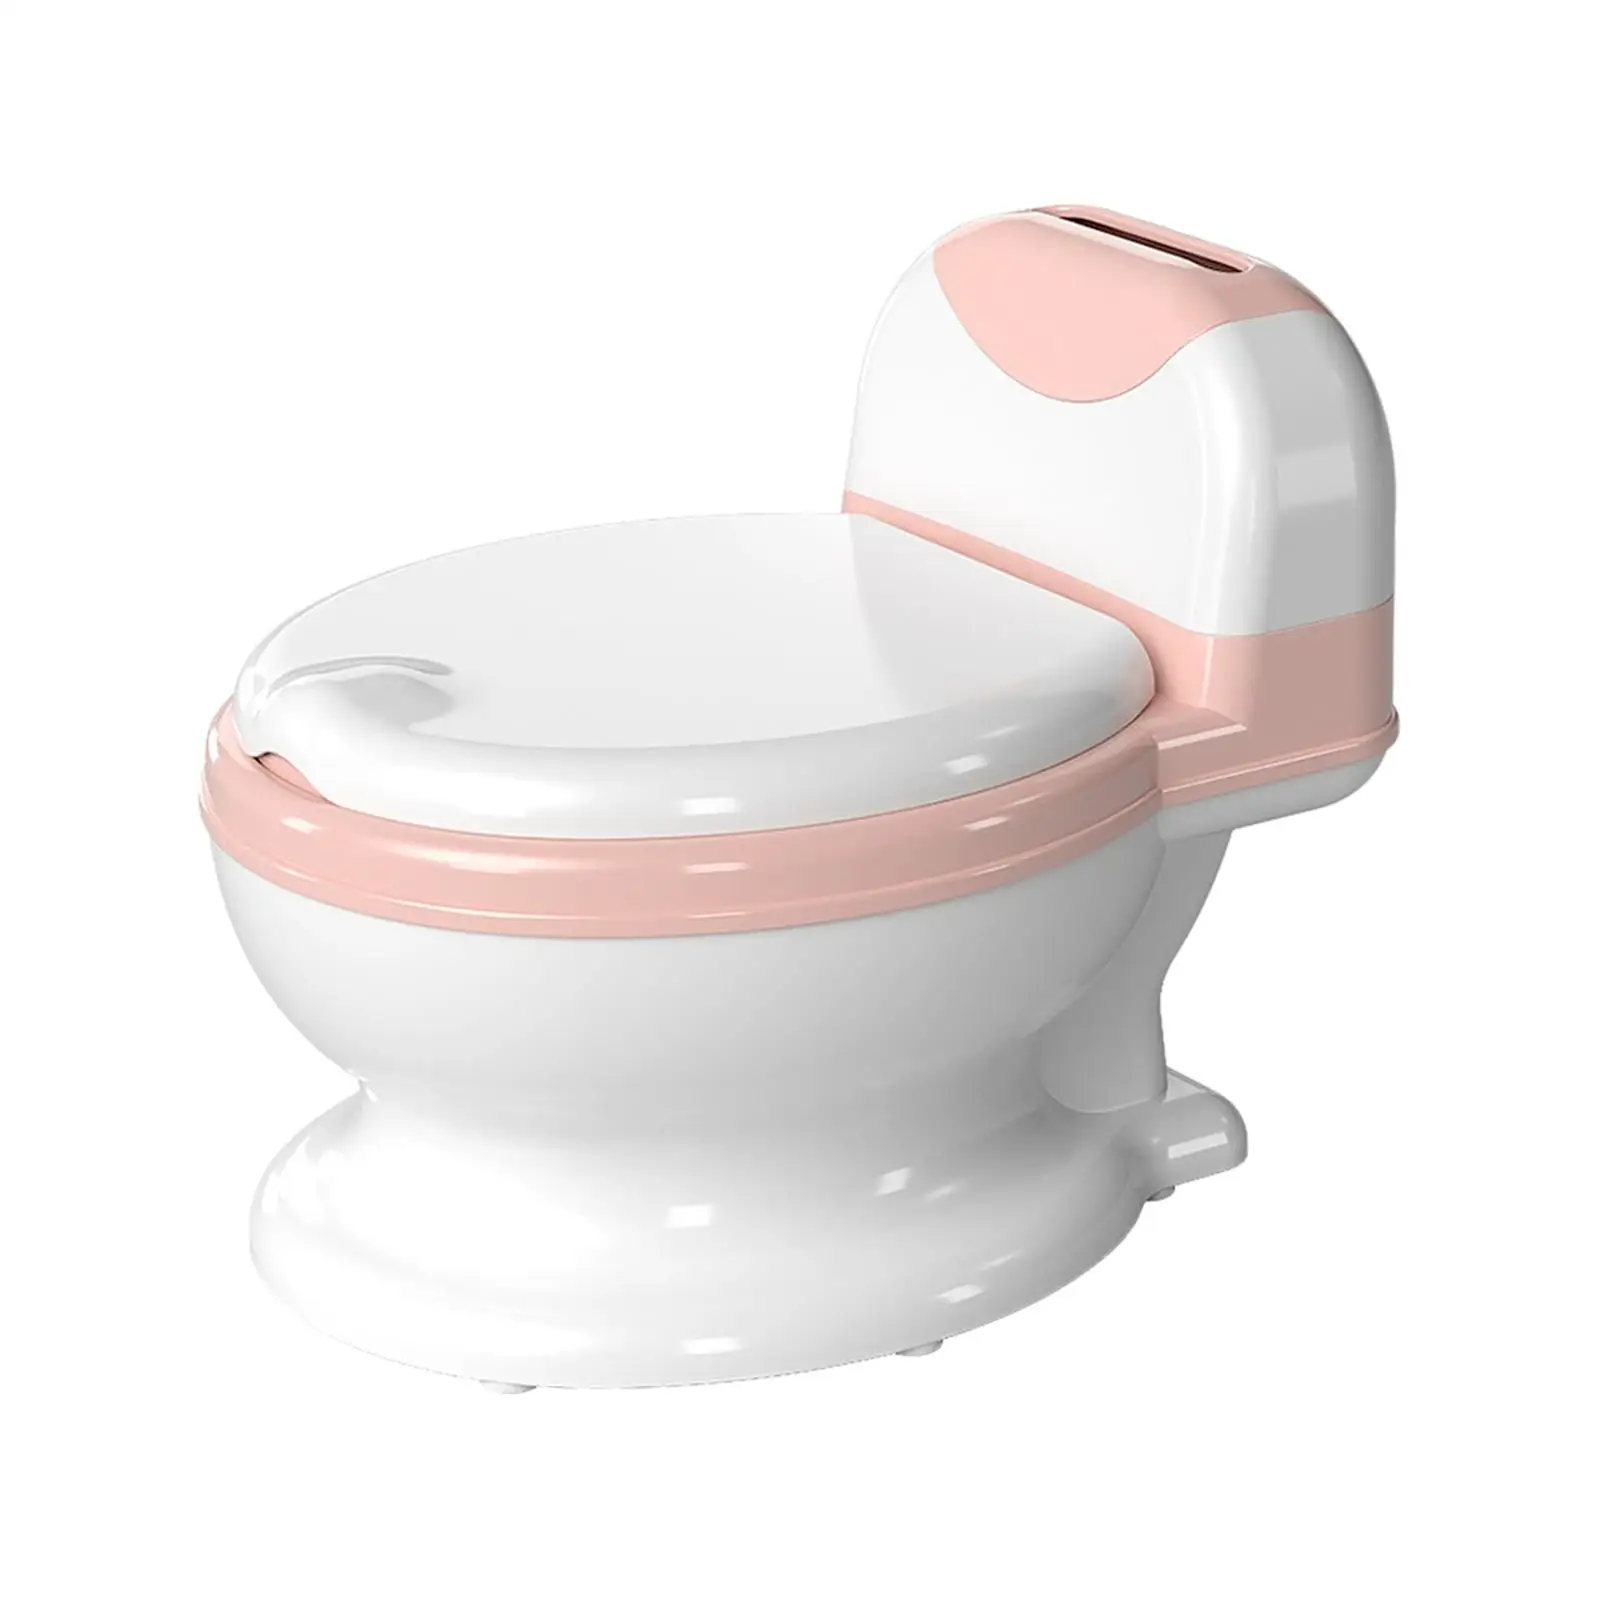 Toilet Realistic Toddler Potty Chair for Bedroom Girls Boys